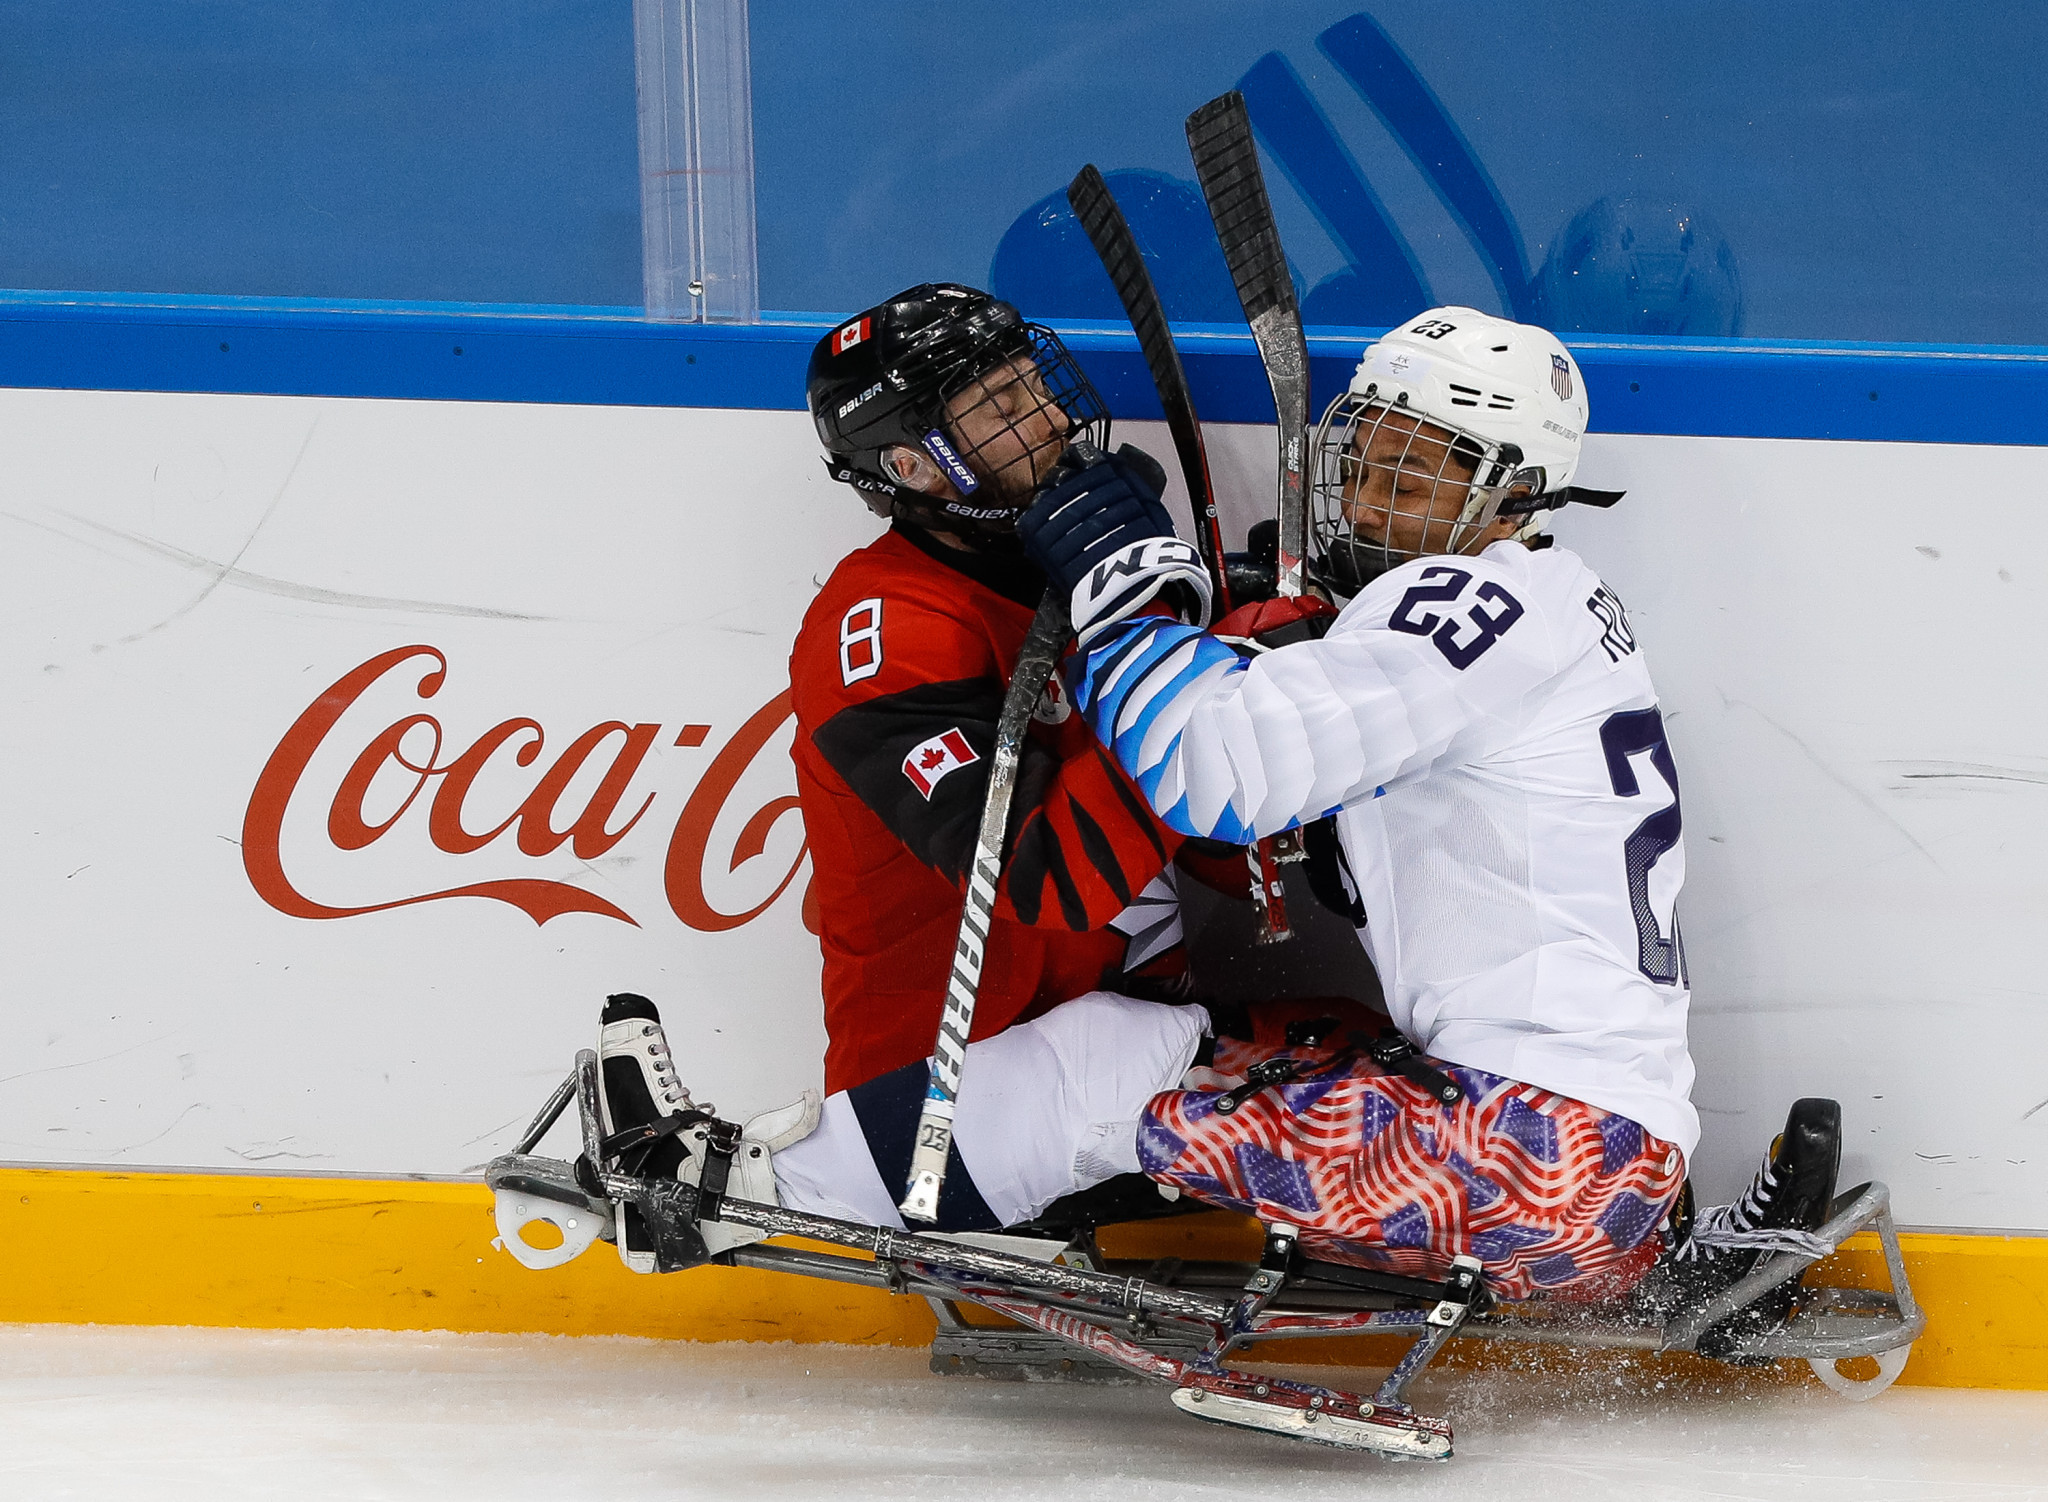 Canada and US to meet in 2018 ice hockey final rematch in Beijing 2022 Paralympics opener